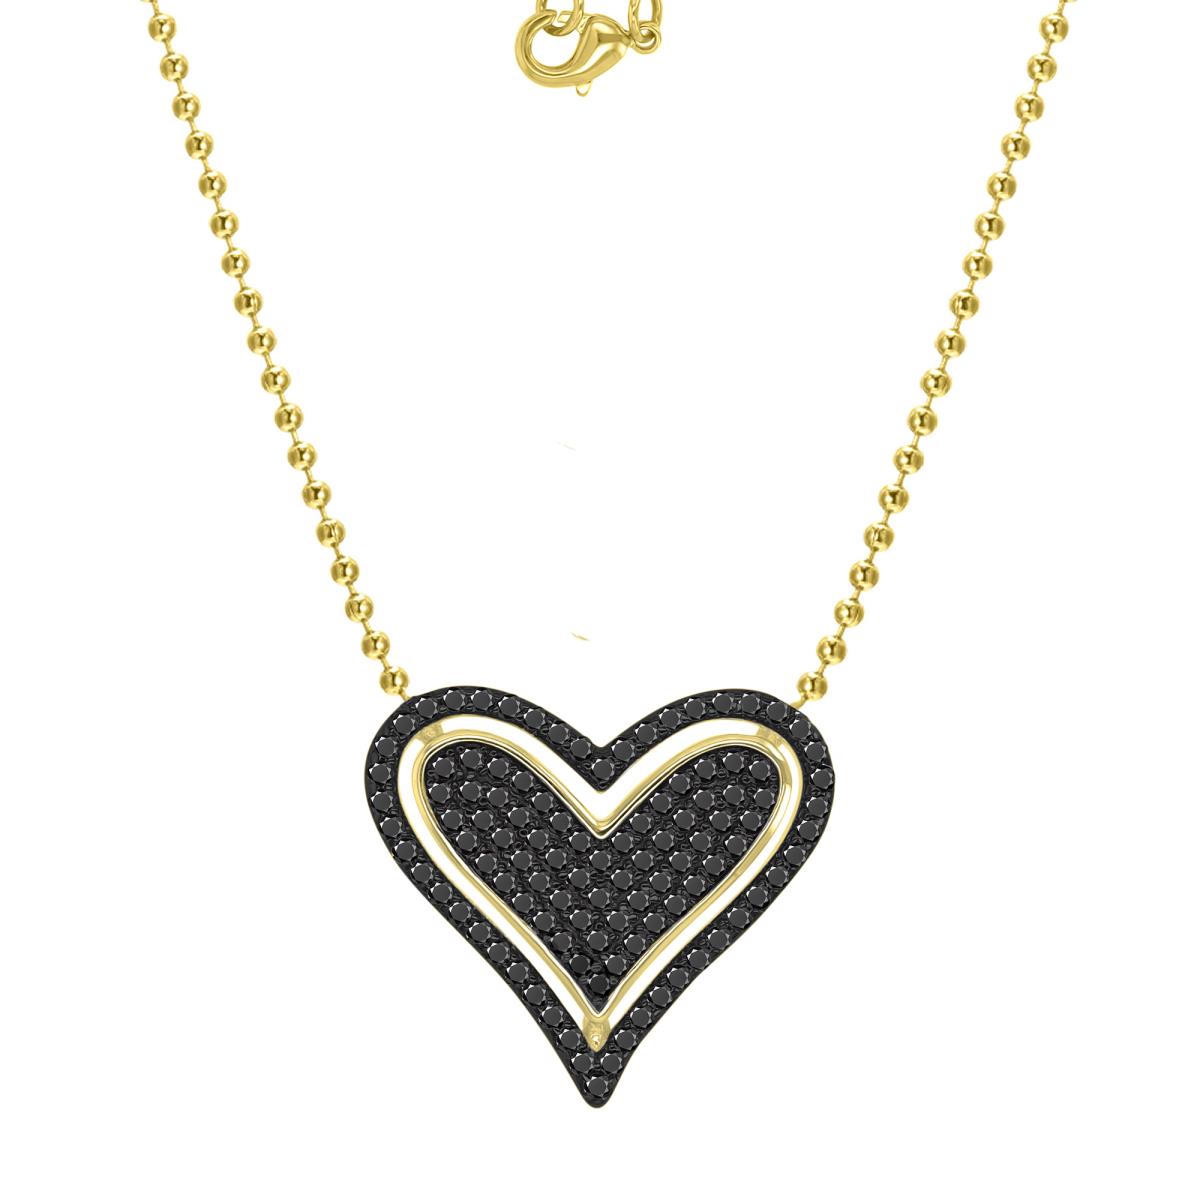 Brass Yellow & Black 17.5x19mm Black CZ Pave Dangling Heart Bead Chain 18+2" Necklace